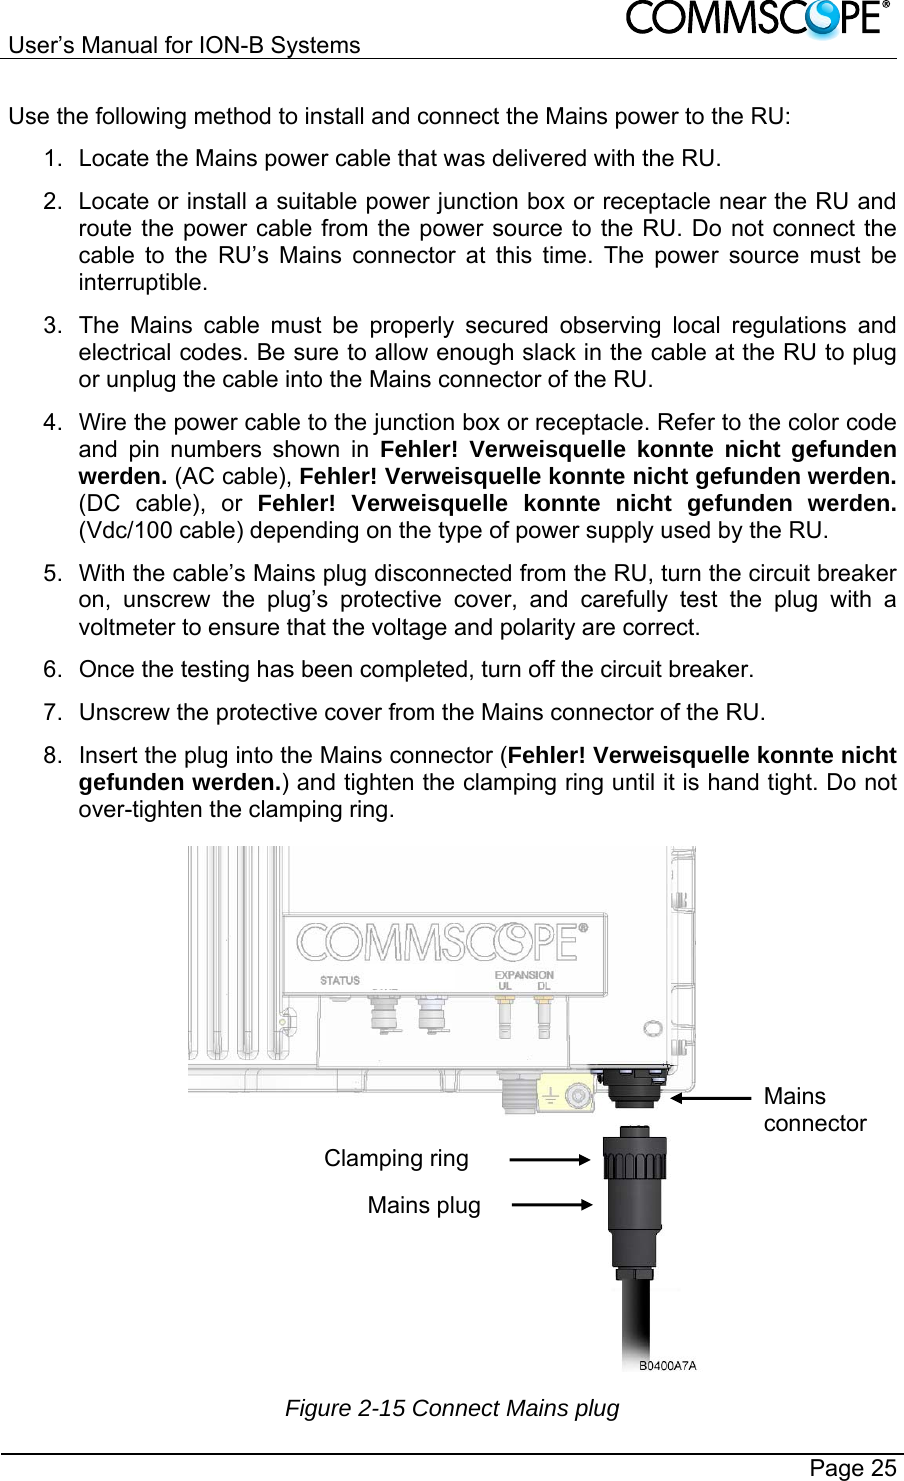 User’s Manual for ION-B Systems       Page 25 Use the following method to install and connect the Mains power to the RU: 1.  Locate the Mains power cable that was delivered with the RU. 2.  Locate or install a suitable power junction box or receptacle near the RU and route the power cable from the power source to the RU. Do not connect the cable to the RU’s Mains connector at this time. The power source must be interruptible. 3.  The Mains cable must be properly secured observing local regulations and electrical codes. Be sure to allow enough slack in the cable at the RU to plug or unplug the cable into the Mains connector of the RU. 4.  Wire the power cable to the junction box or receptacle. Refer to the color code and pin numbers shown in Fehler! Verweisquelle konnte nicht gefunden werden. (AC cable), Fehler! Verweisquelle konnte nicht gefunden werden. (DC cable), or Fehler! Verweisquelle konnte nicht gefunden werden. (Vdc/100 cable) depending on the type of power supply used by the RU. 5.  With the cable’s Mains plug disconnected from the RU, turn the circuit breaker on, unscrew the plug’s protective cover, and carefully test the plug with a voltmeter to ensure that the voltage and polarity are correct. 6.  Once the testing has been completed, turn off the circuit breaker. 7.  Unscrew the protective cover from the Mains connector of the RU. 8.  Insert the plug into the Mains connector (Fehler! Verweisquelle konnte nicht gefunden werden.) and tighten the clamping ring until it is hand tight. Do not over-tighten the clamping ring.  Figure 2-15 Connect Mains plug Clamping ring Mains plug Mains connector